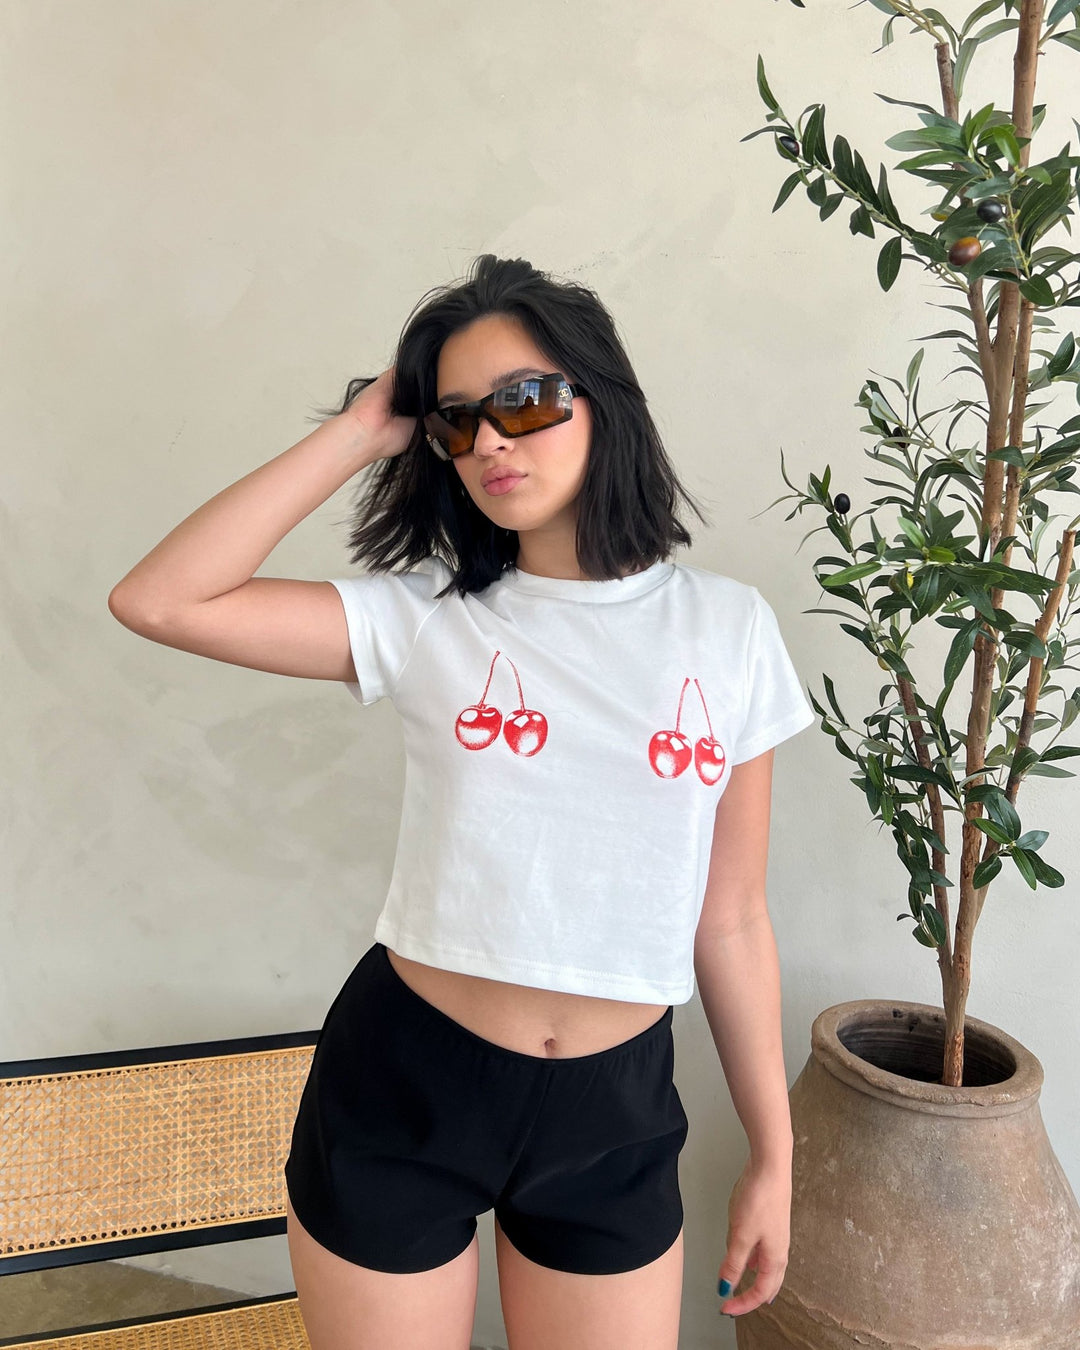 Cherry Bomb Cropped Baby Tee - Marmol Boutique